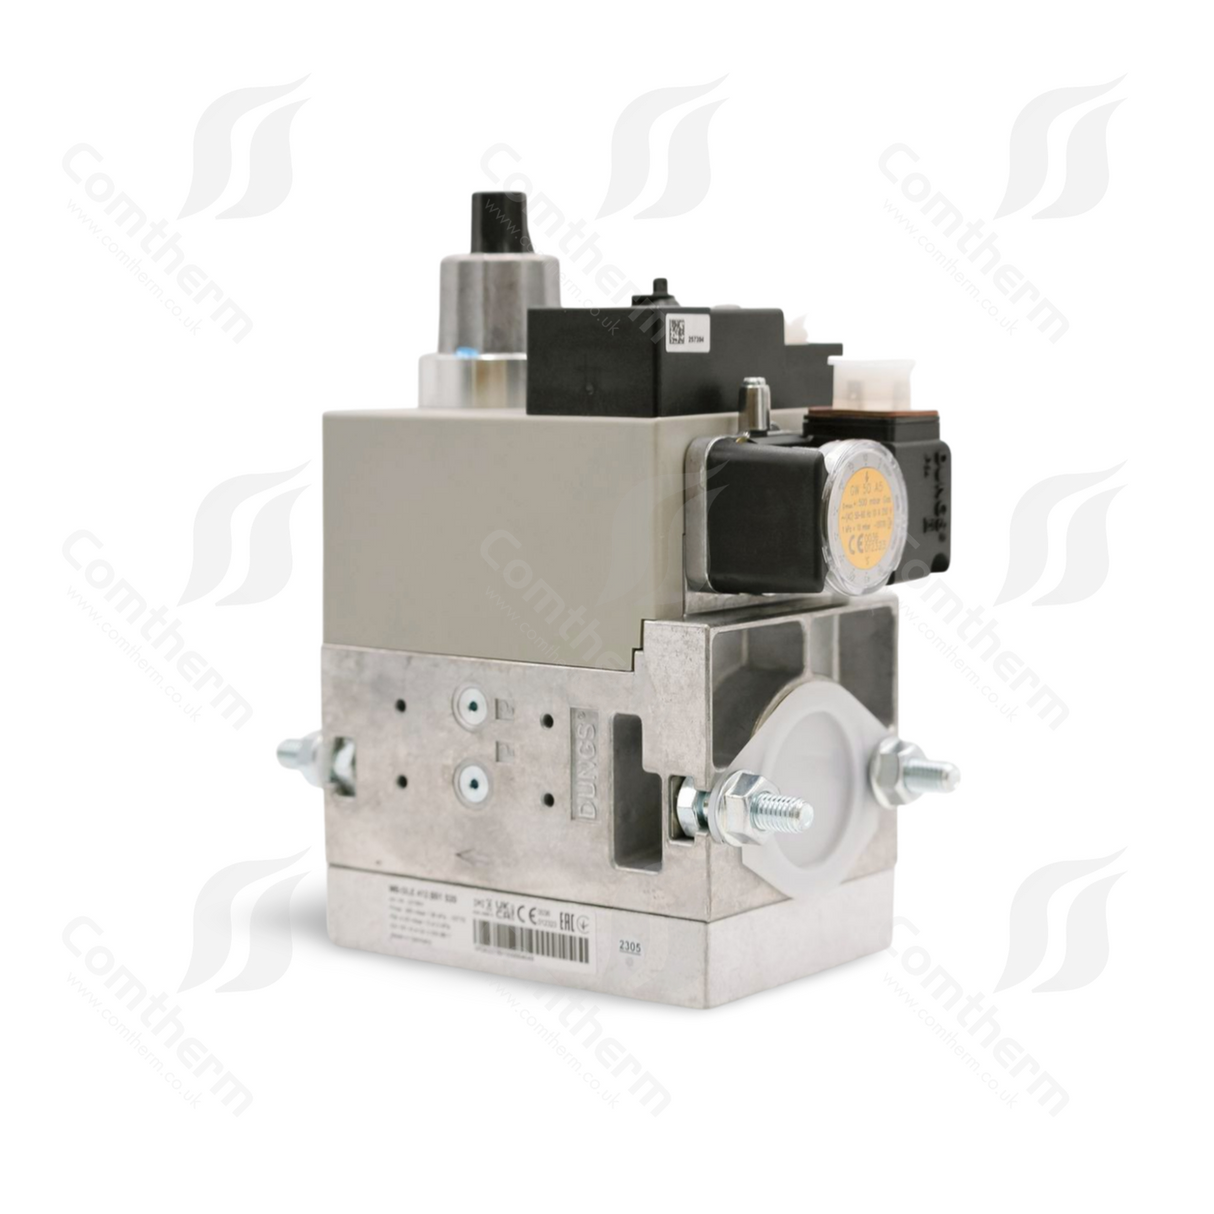 Dungs MB-DLE 412 B07 S22 + GW150A5 Multibloc Gas Valve - 110v